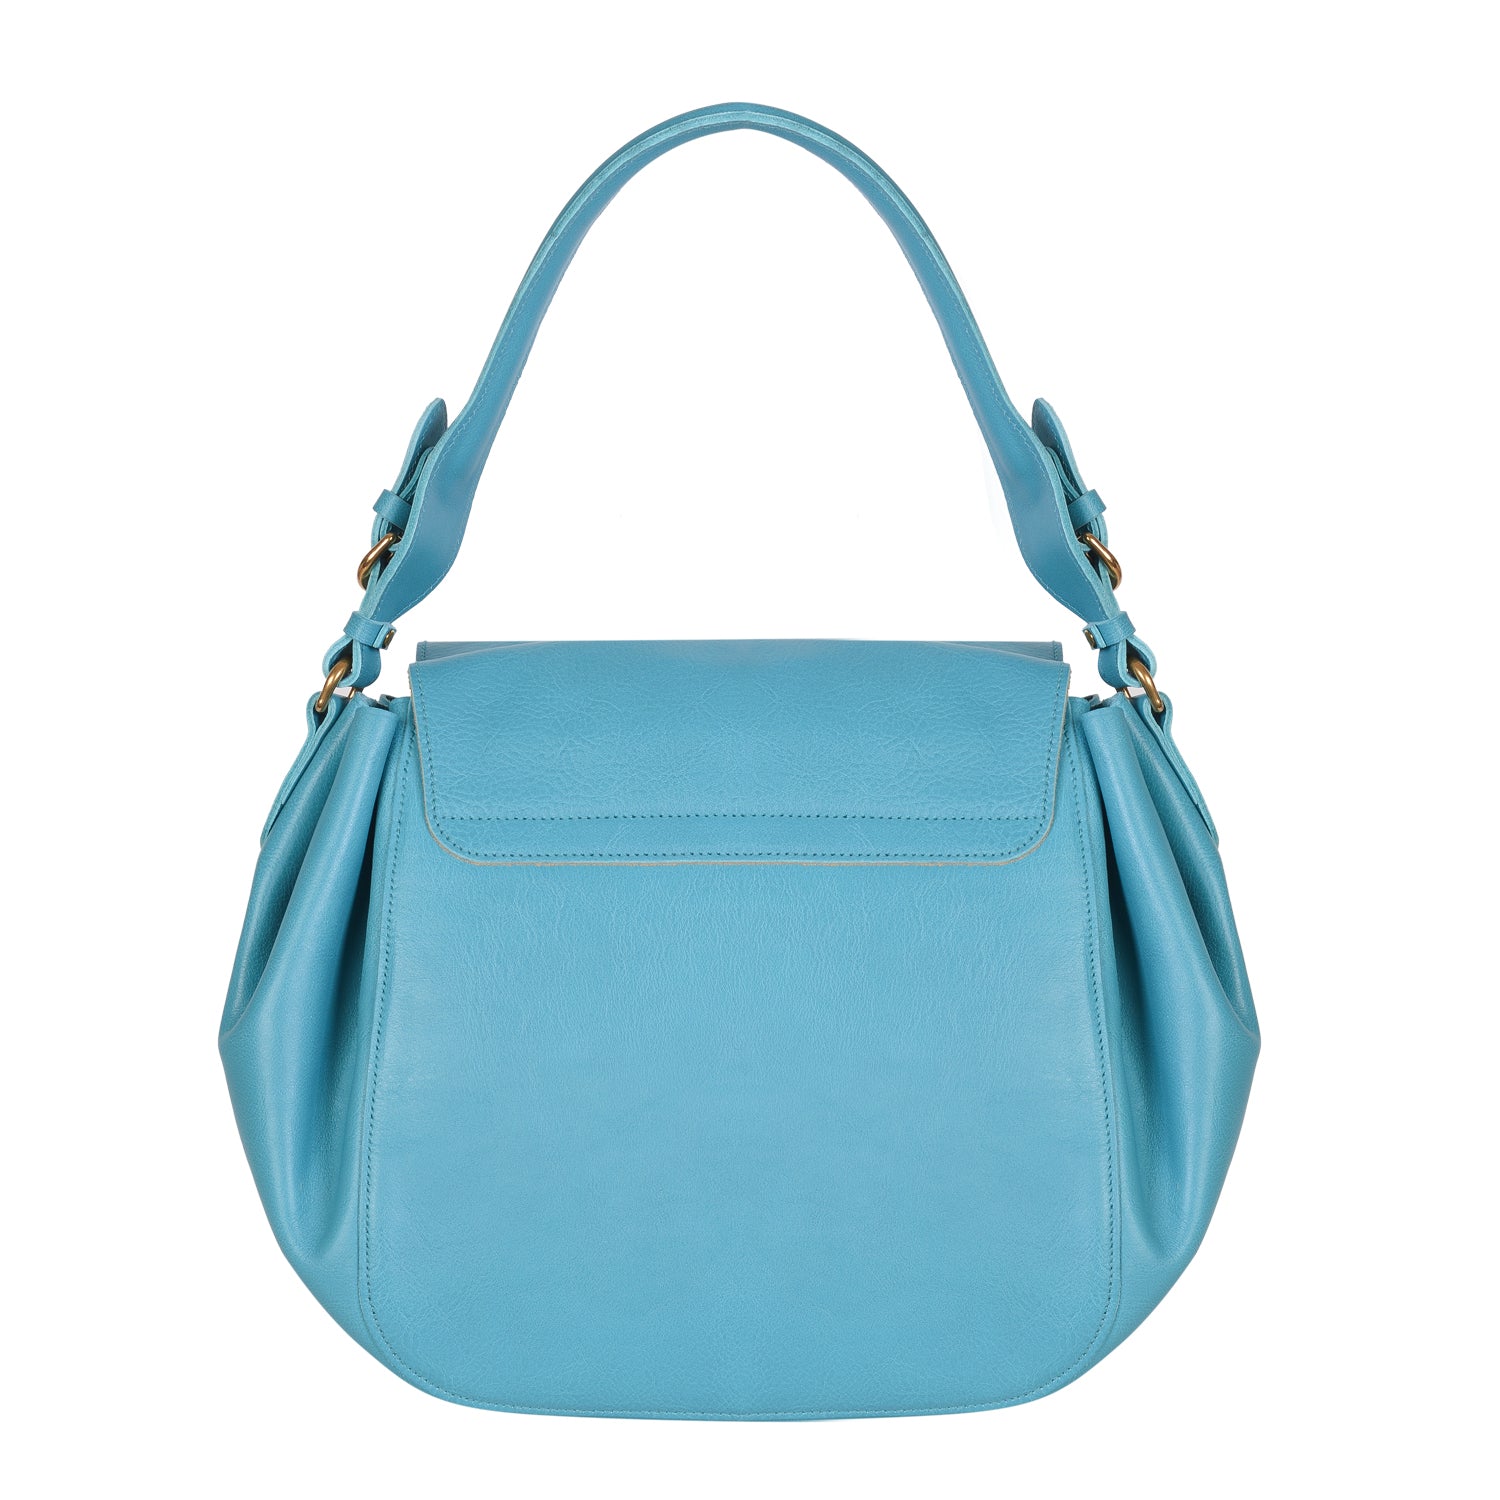 NEW IL BISONTE WOMEN'S CURLY COLLECTION SHOULDER BAG IN TURQUOISE LEATHER